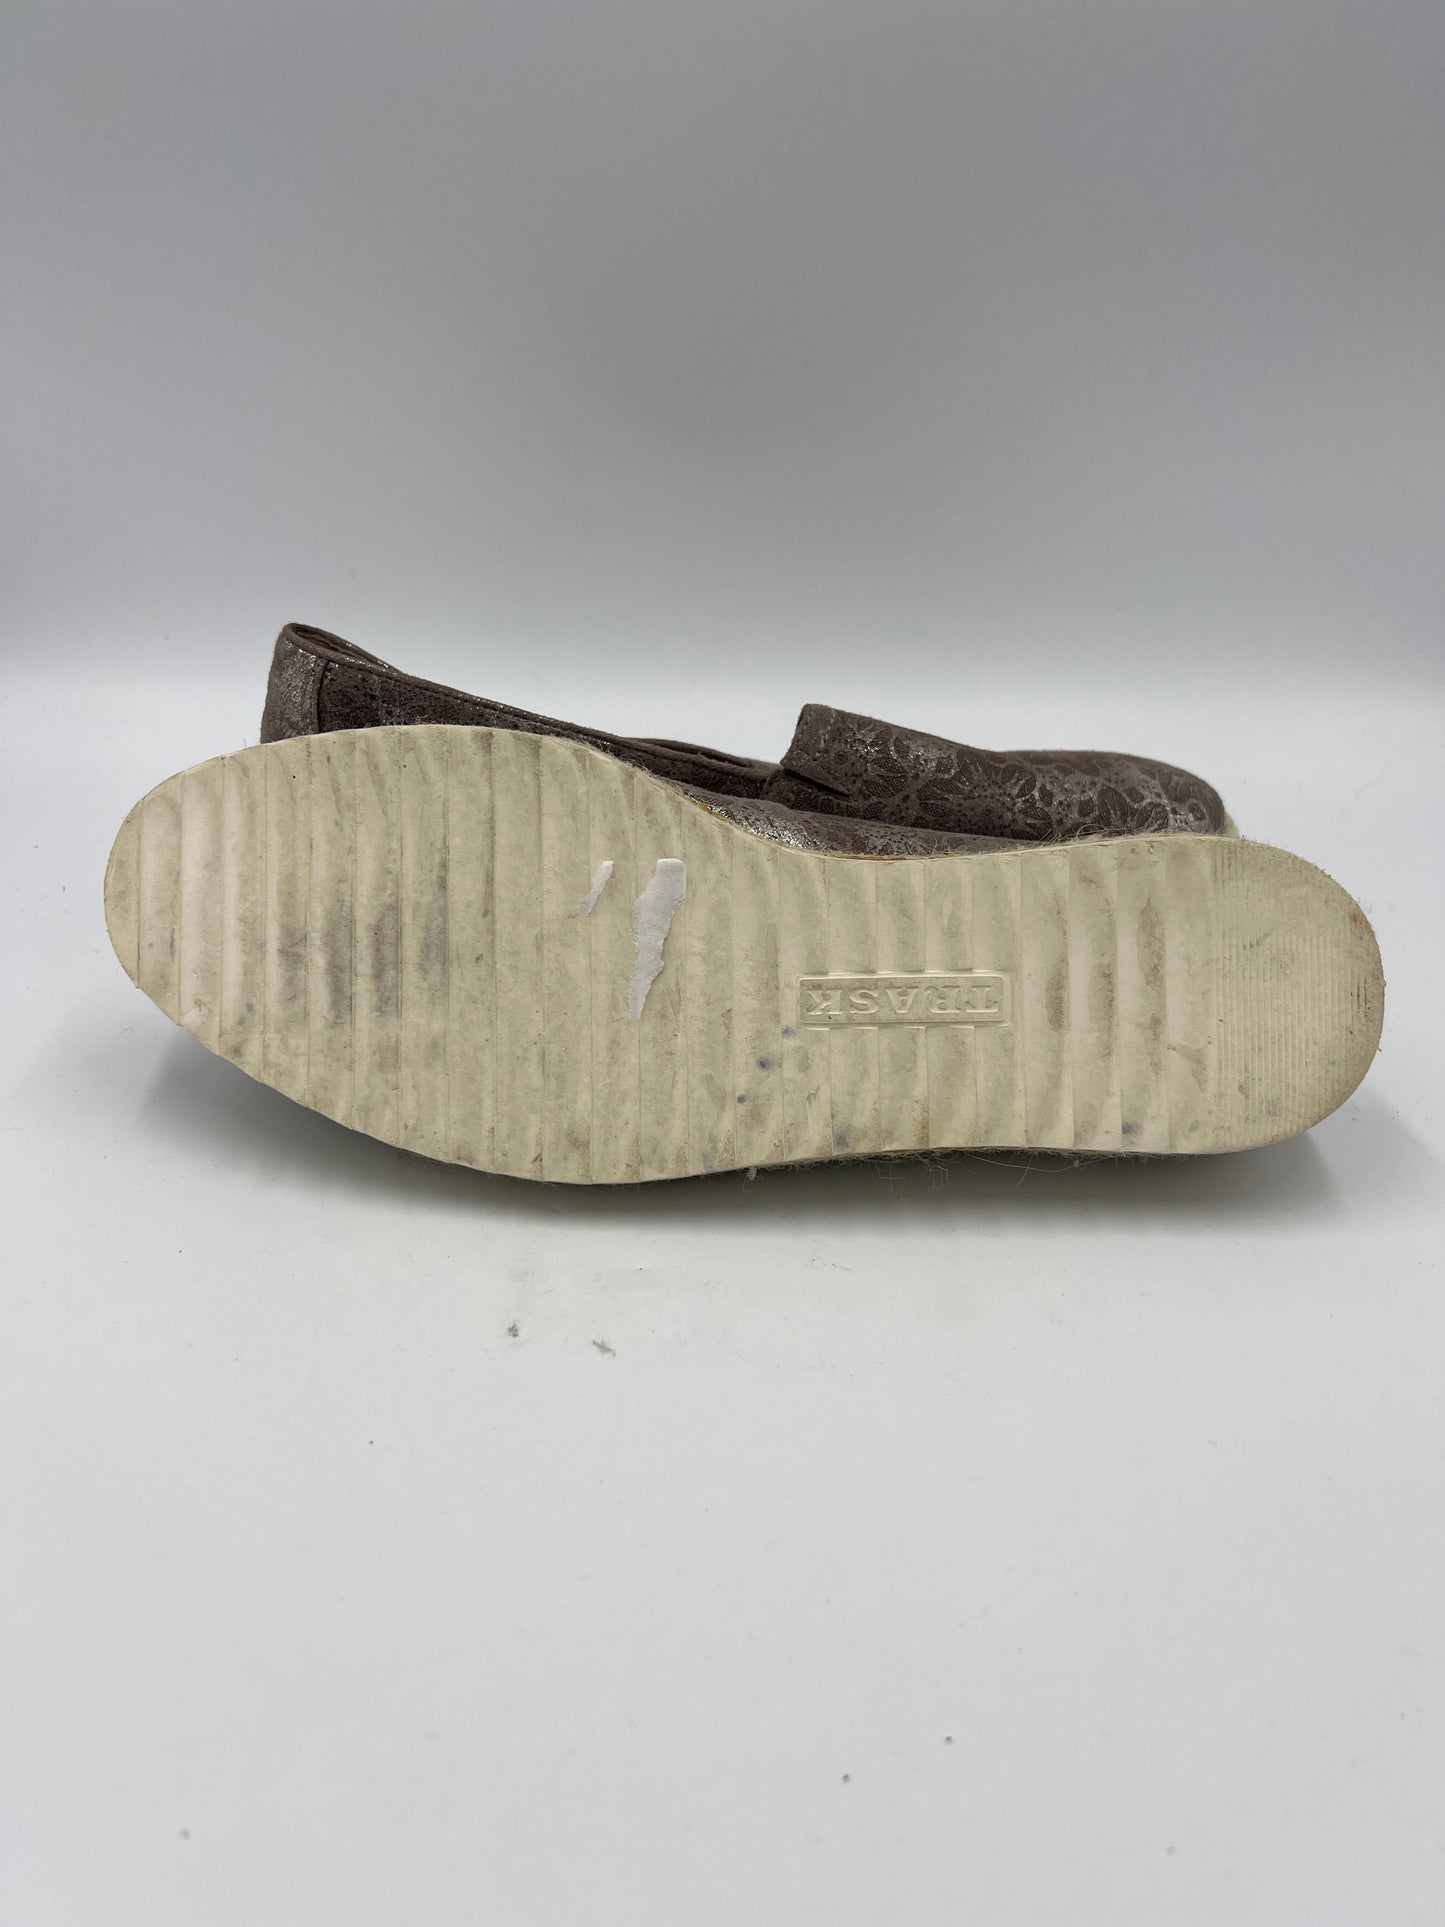 Shoes Flats Espadrille By Trask  Size: 11